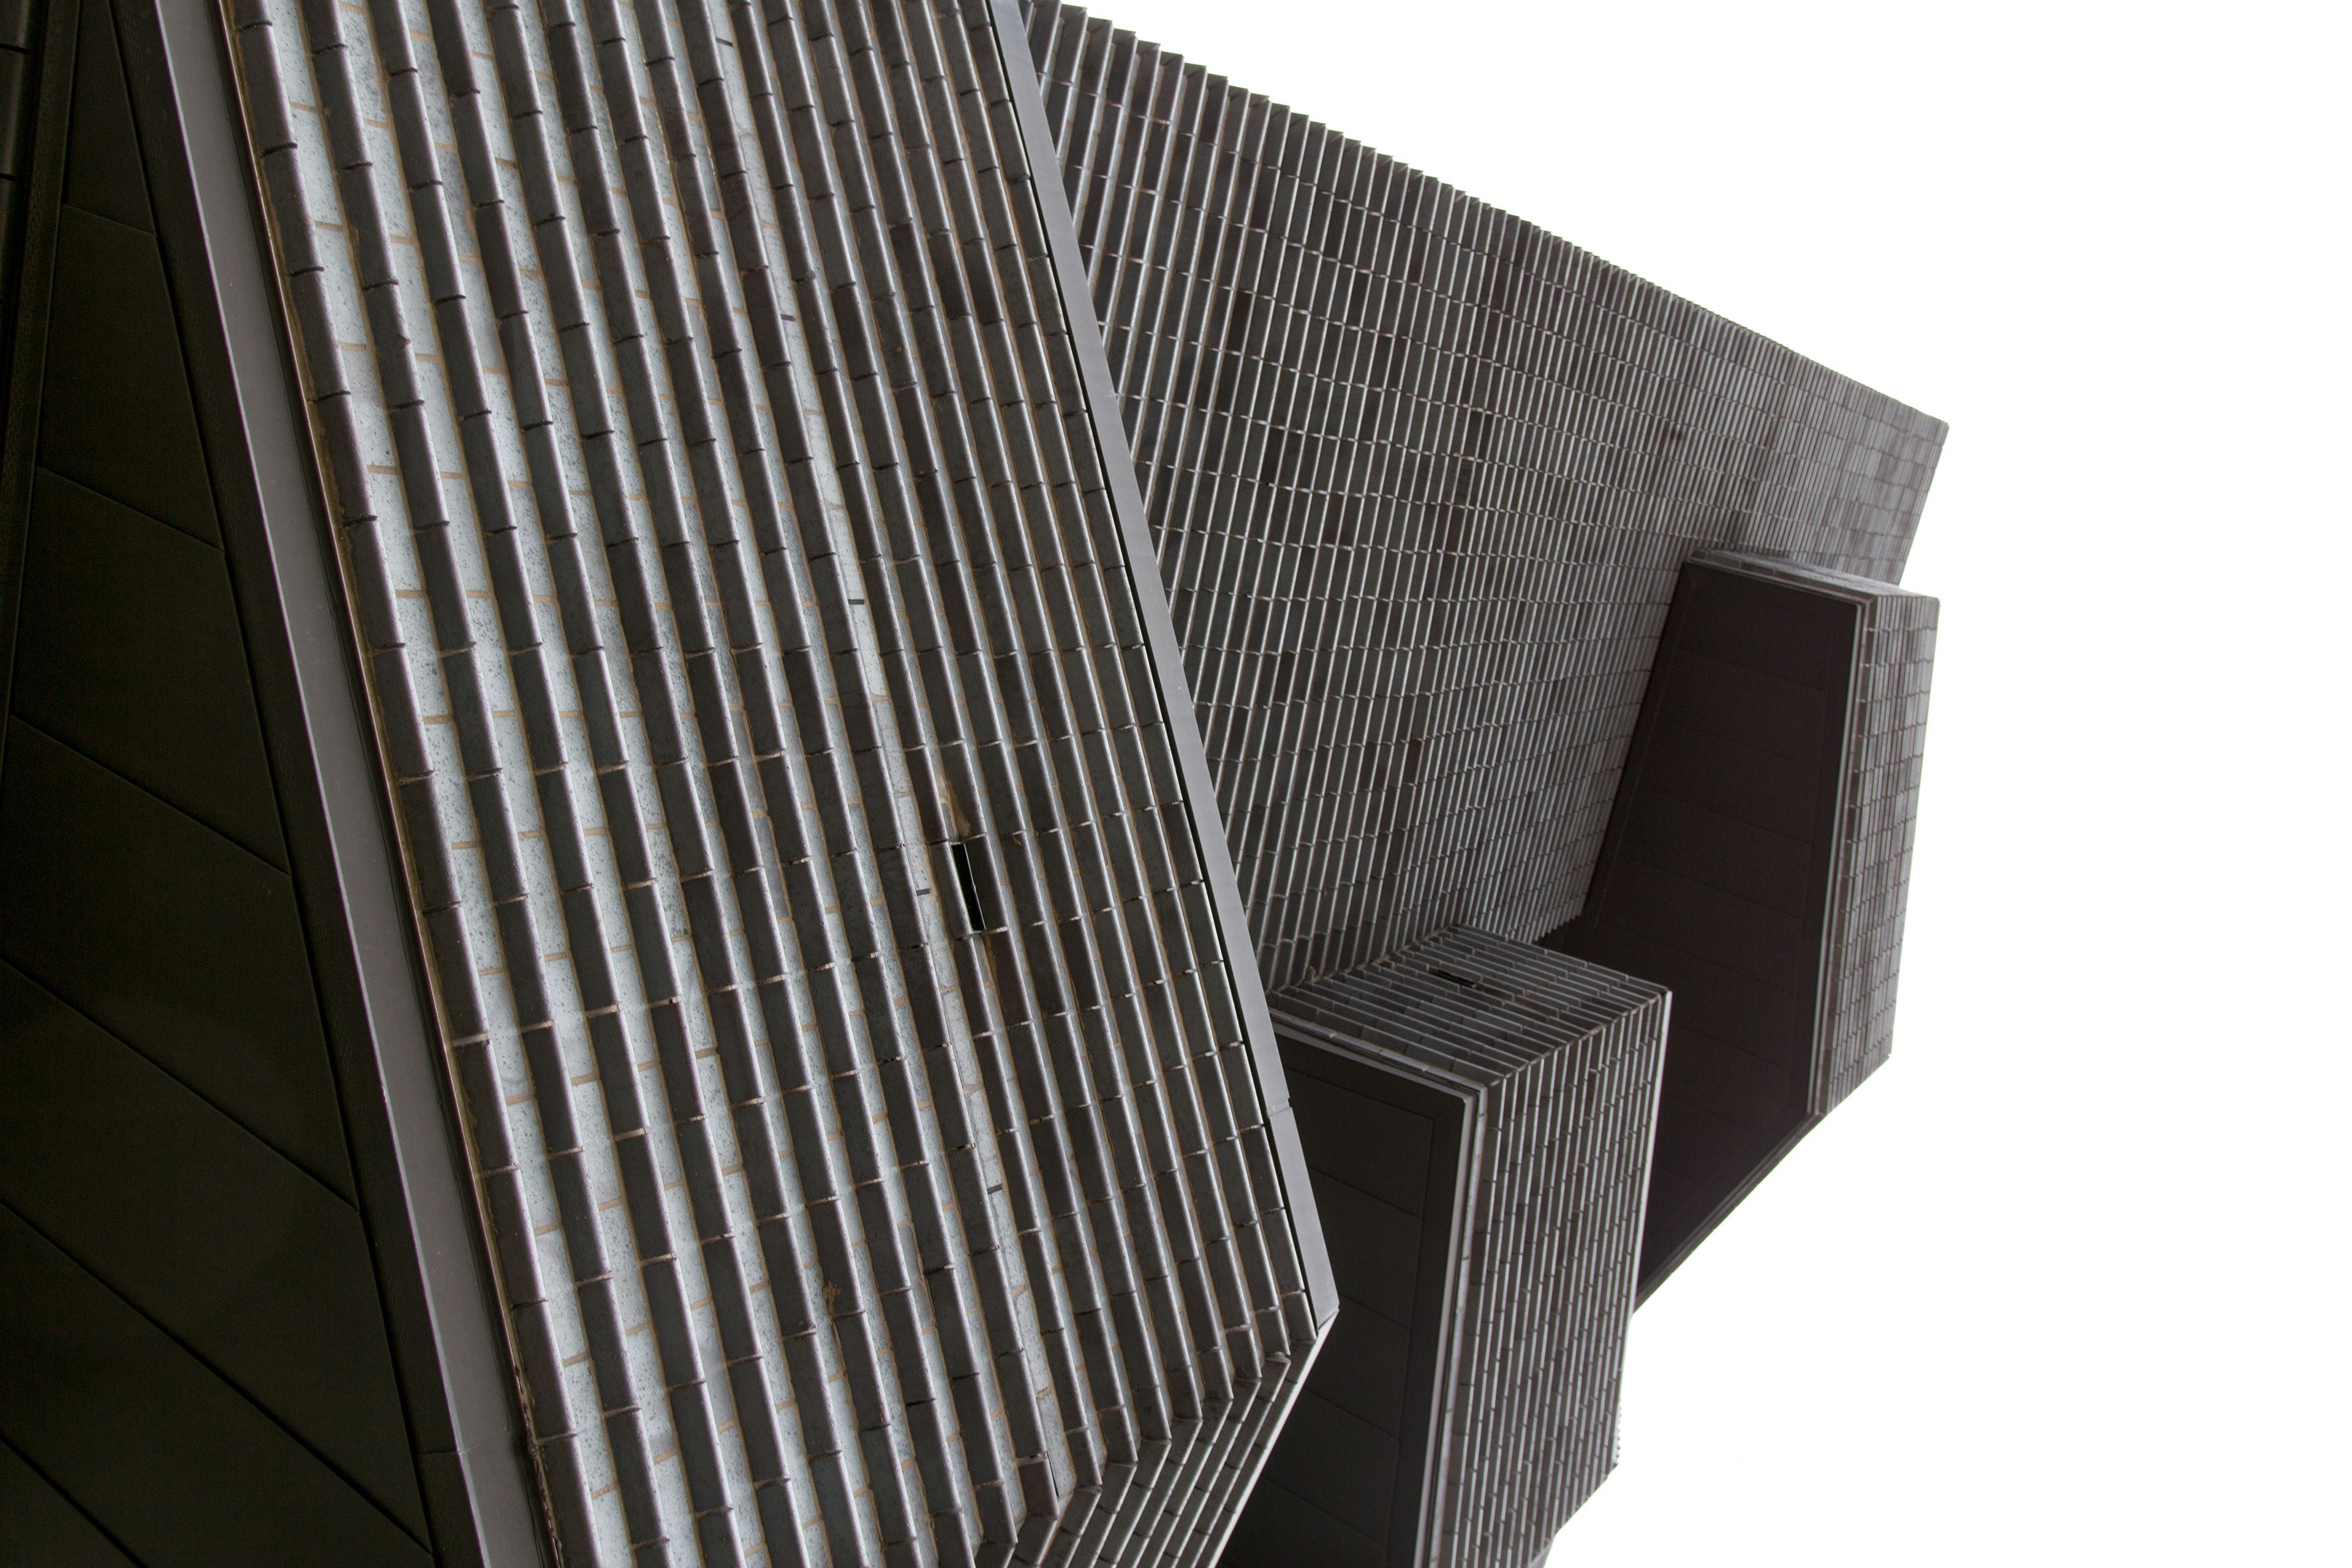 A modern black brick building, photographed at an angle that makes it unclear which way is up.